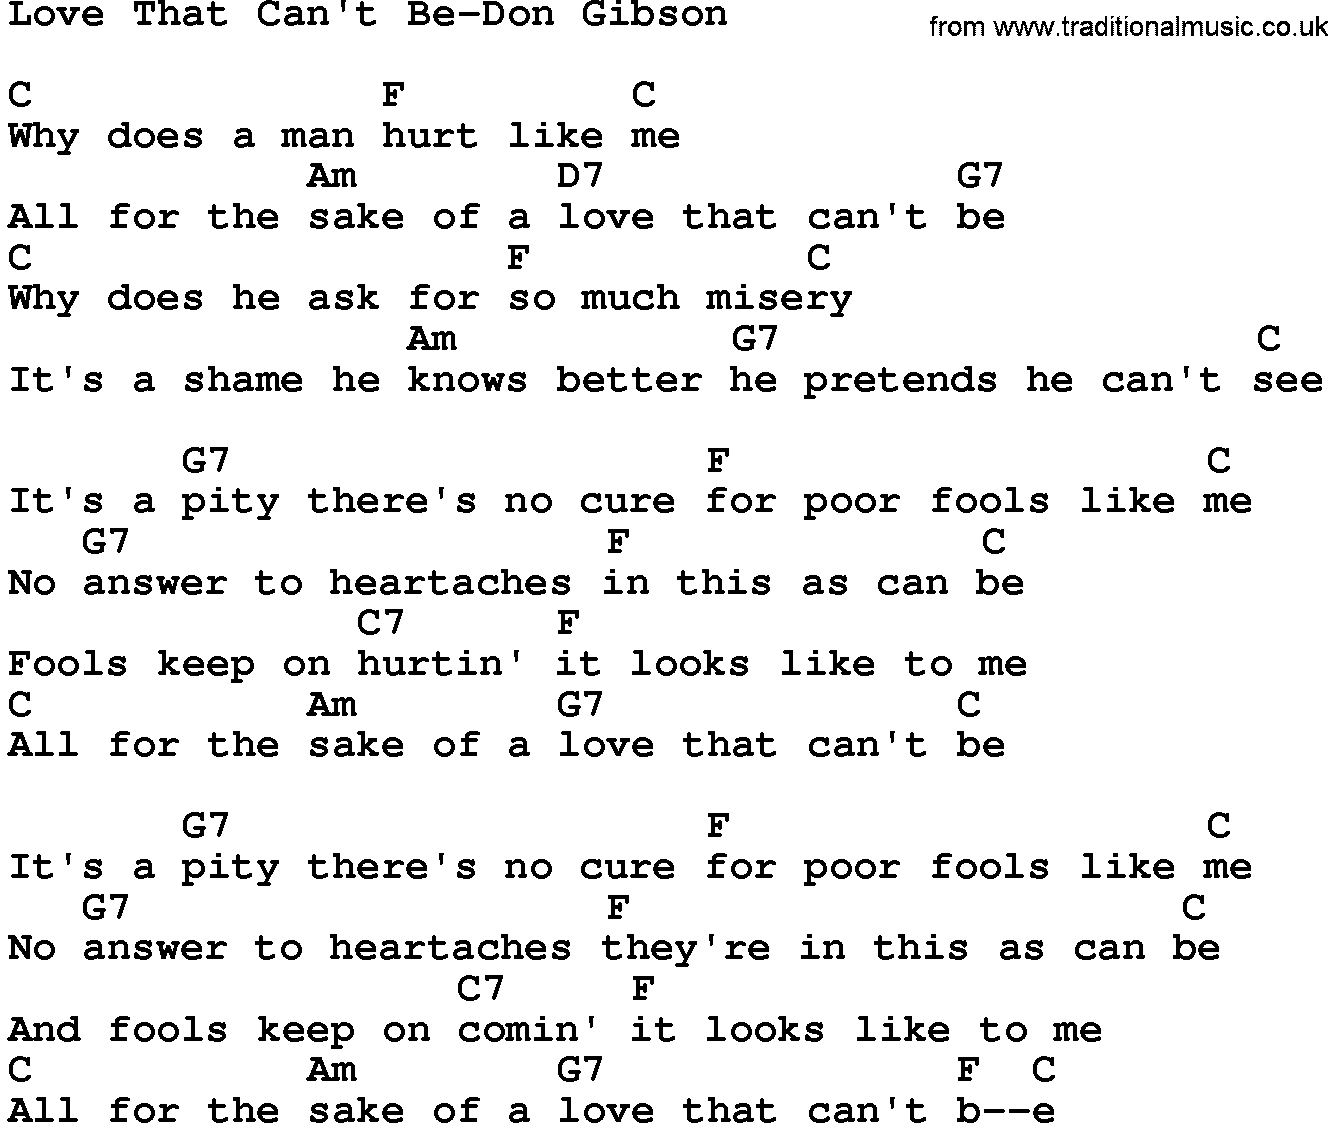 Country music song: Love That Can't Be-Don Gibson lyrics and chords